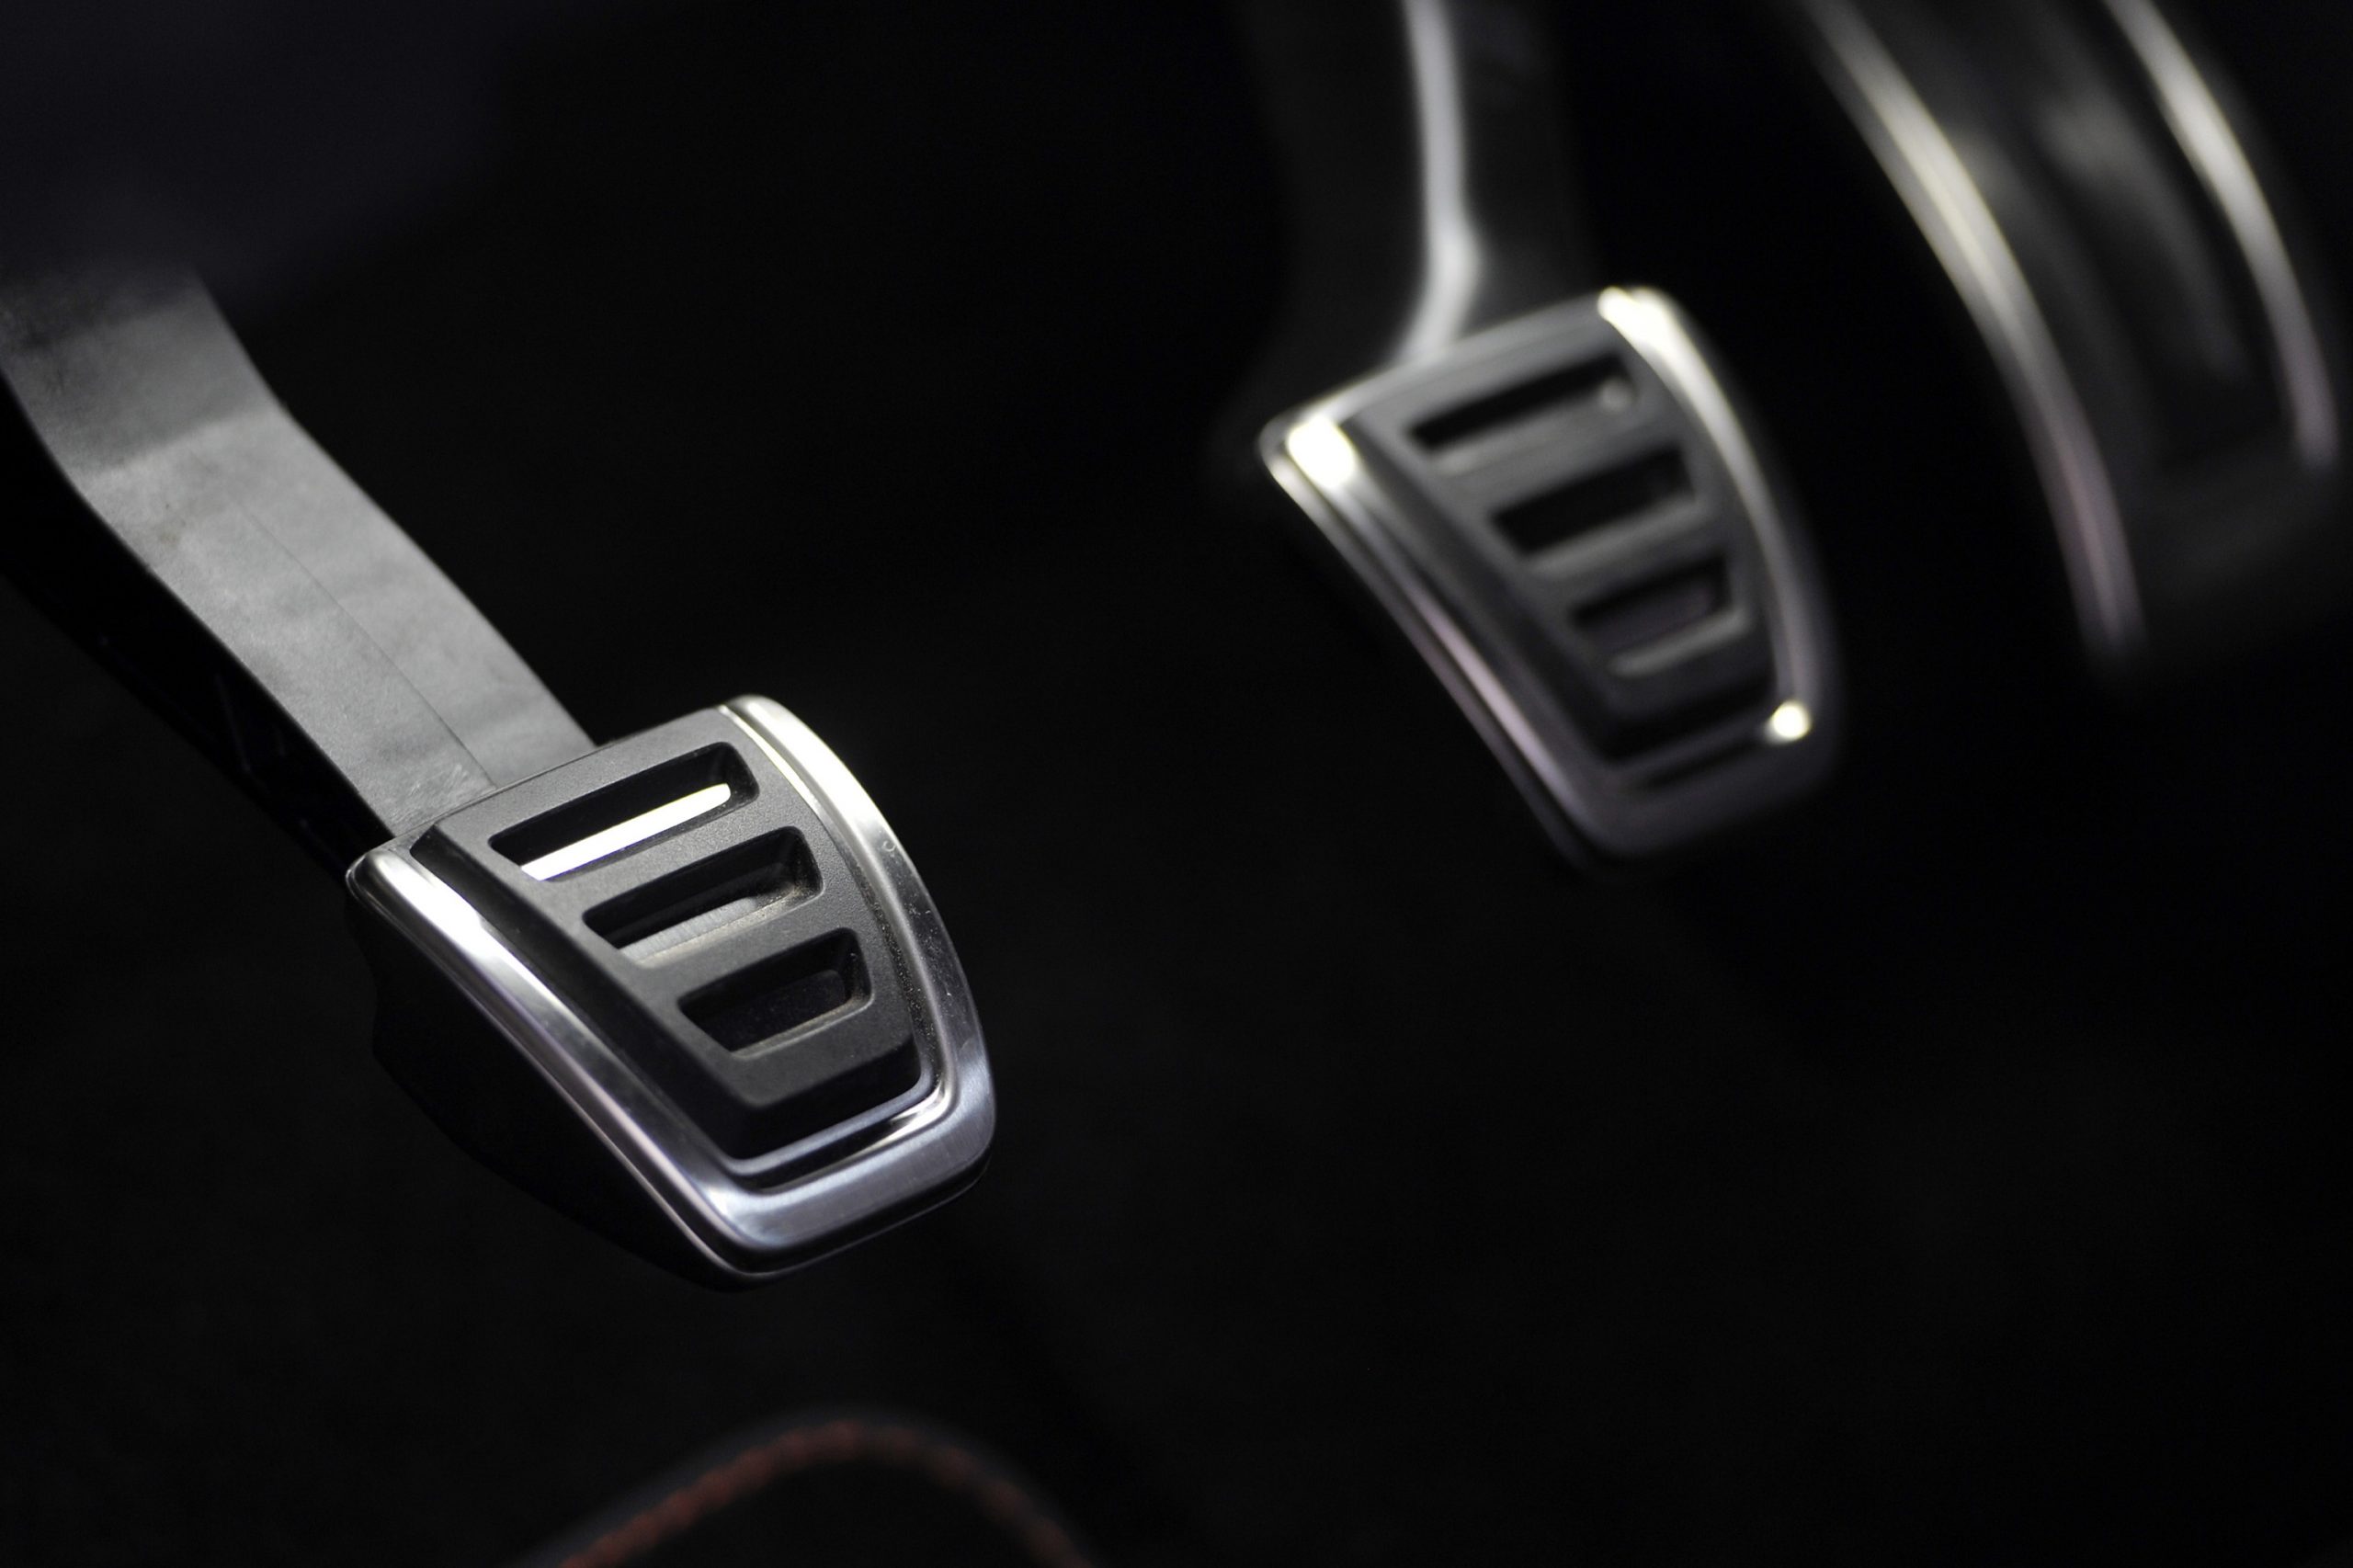 The gas pedals of a Volkswagen product at the Geneva motor show